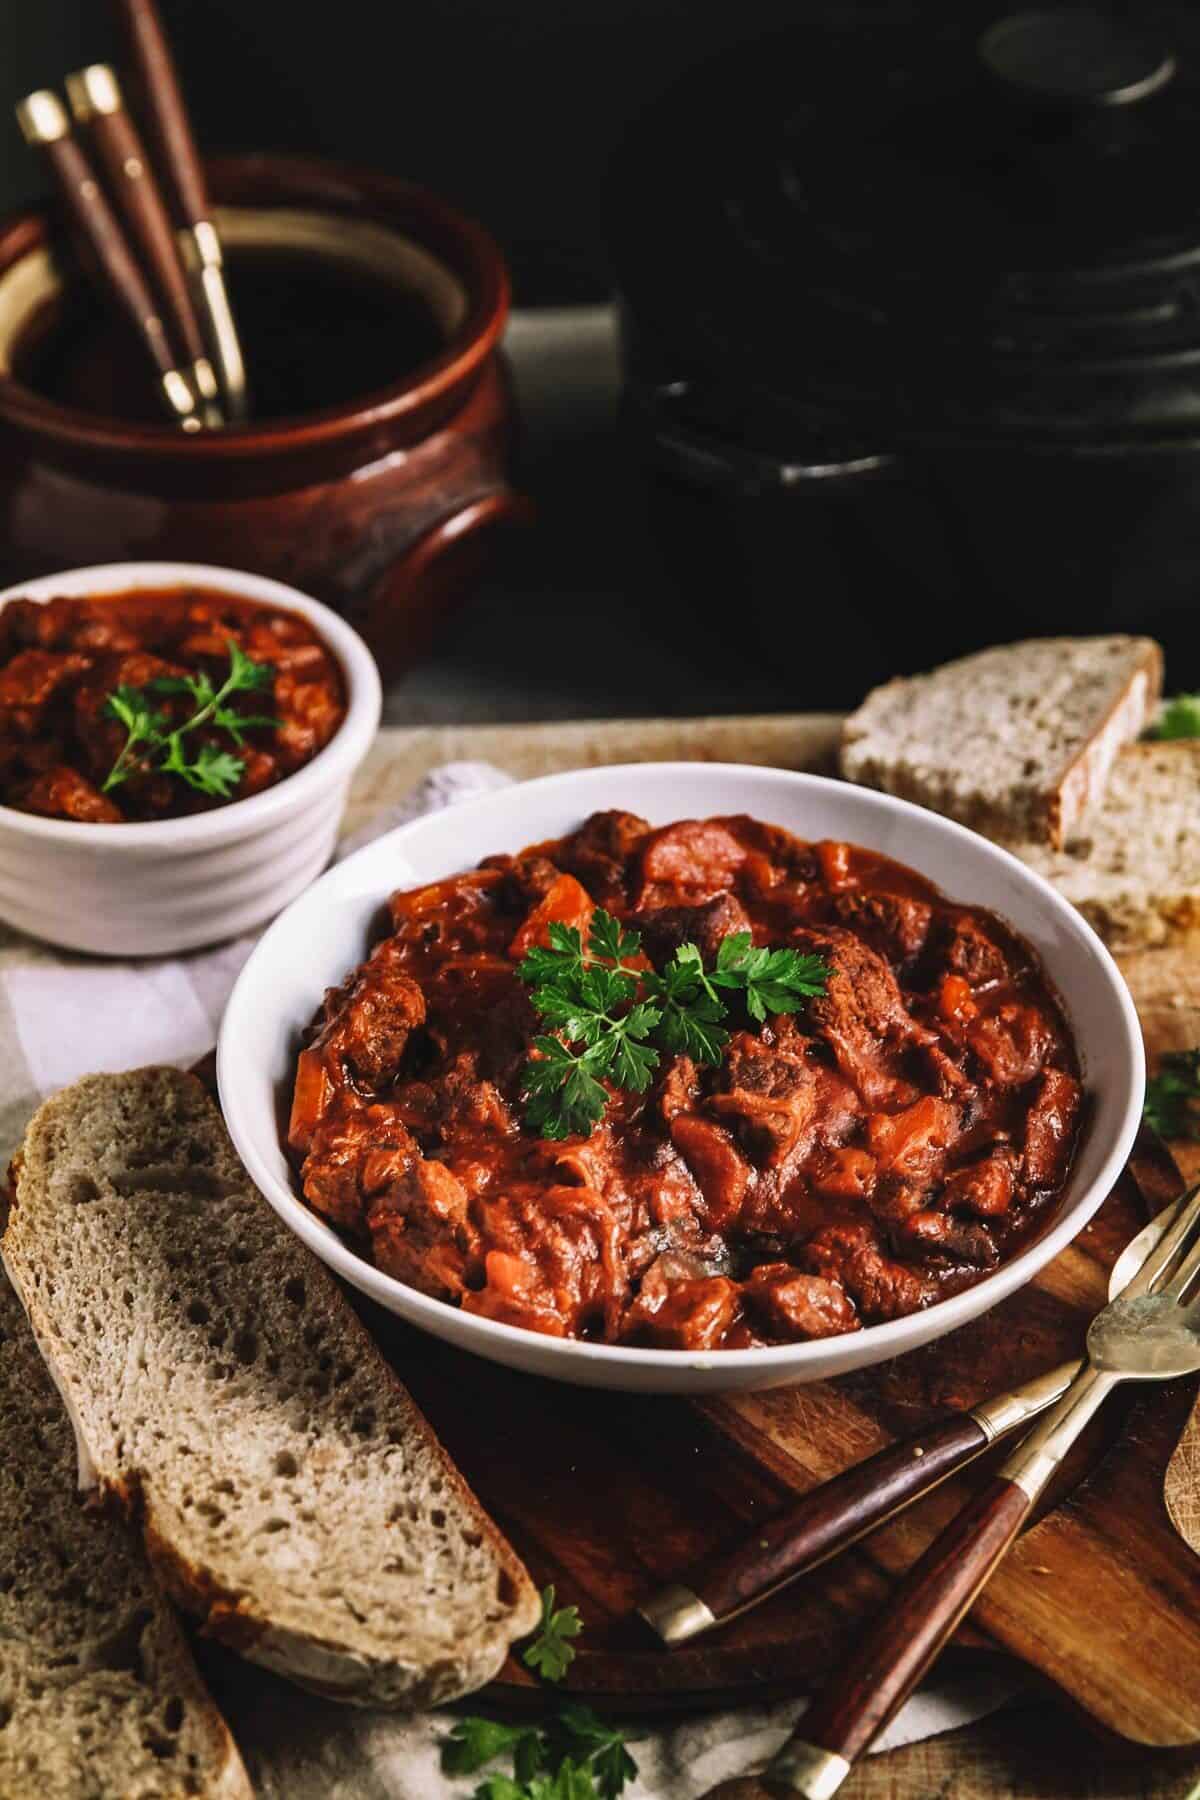 A lage and a small plaate of beef stew on a wooden table with bread and utensils